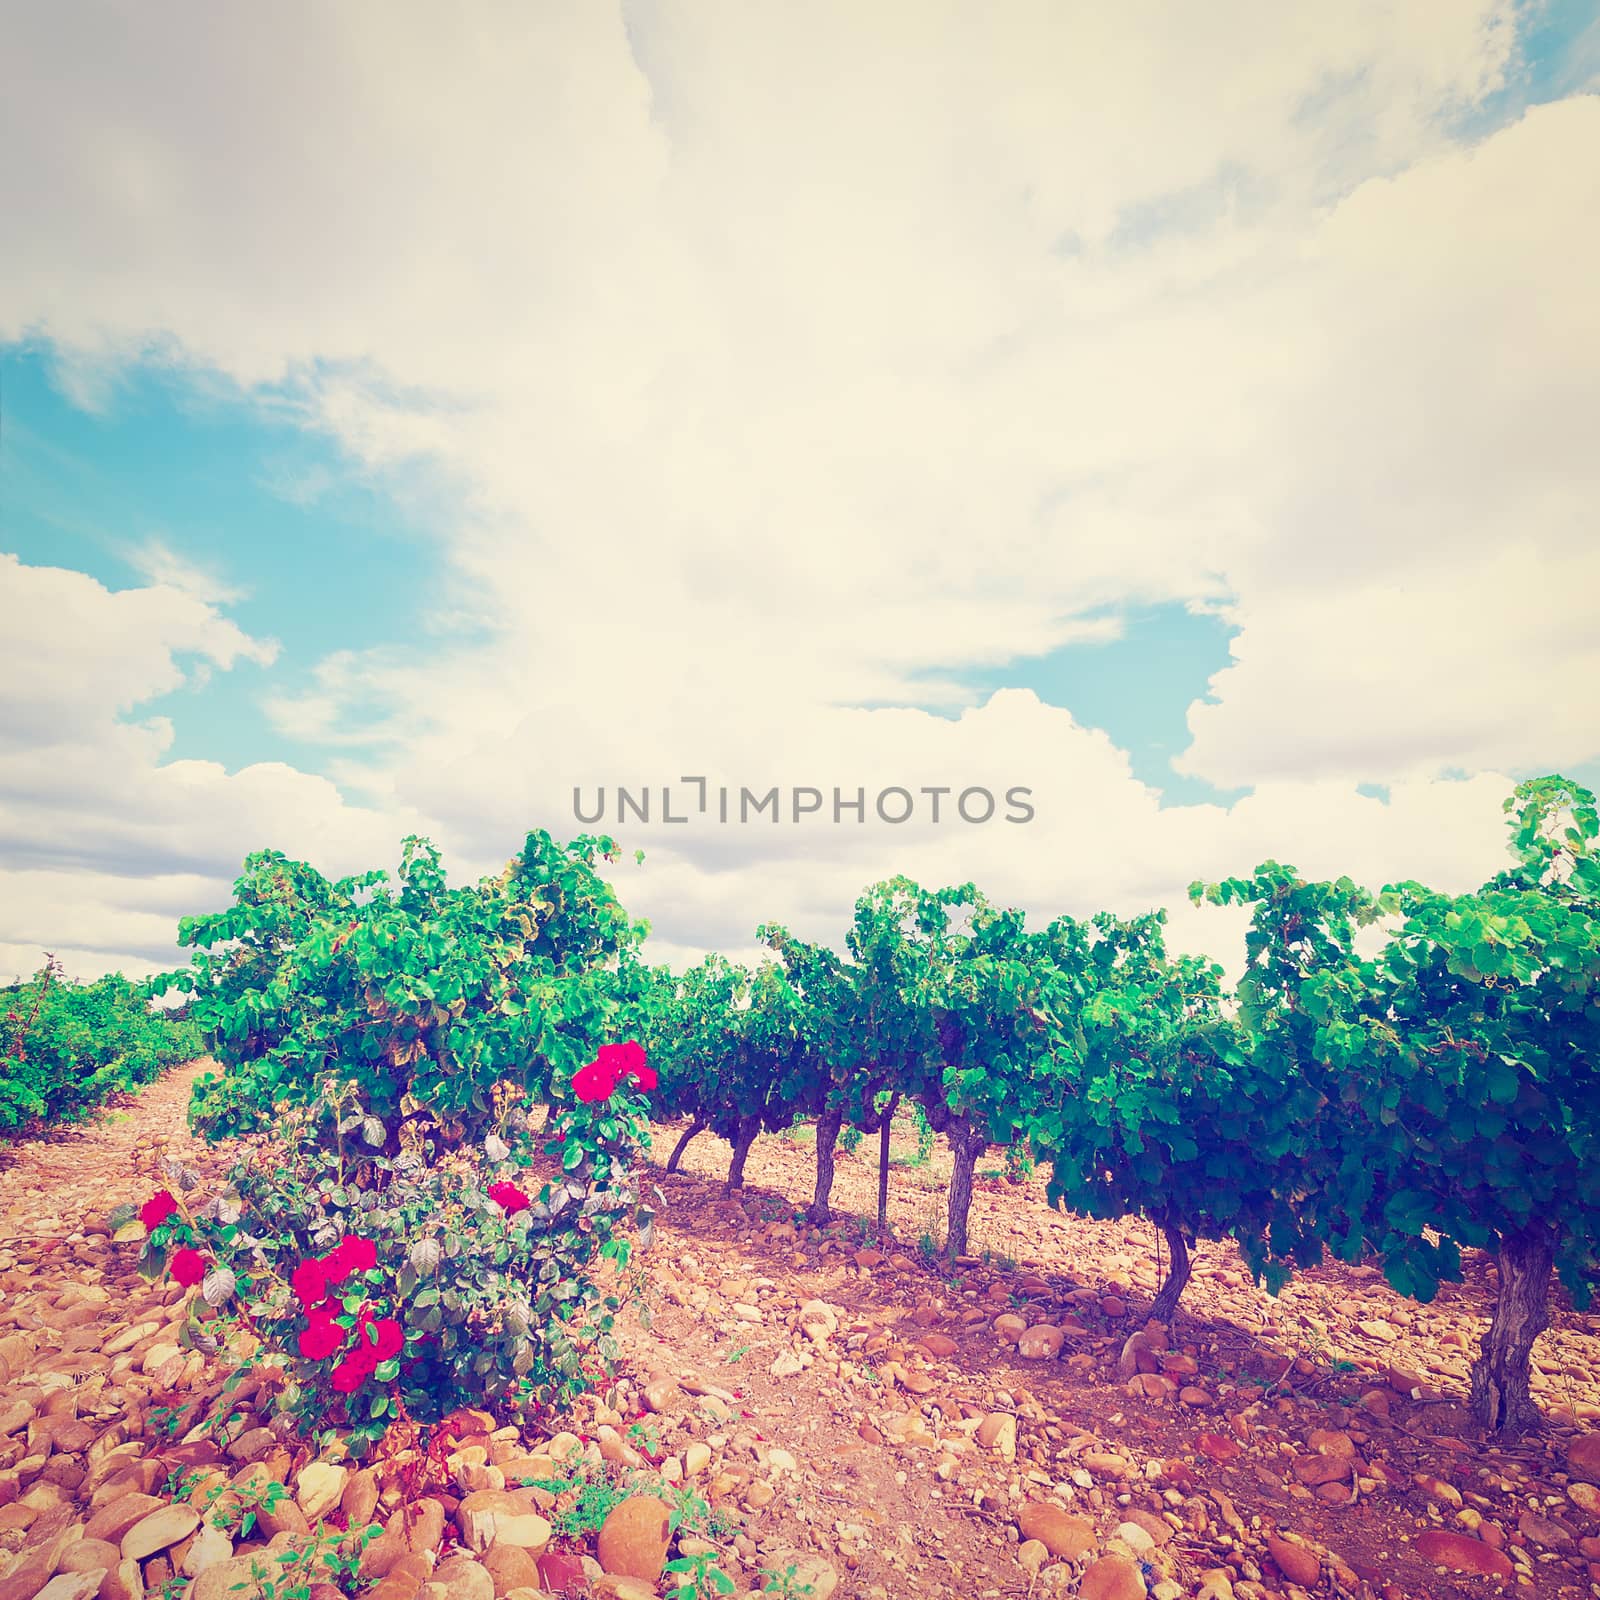 Hill in Spain with Ripe Vineyard and Rosebush, Vintage Style Toned Picture